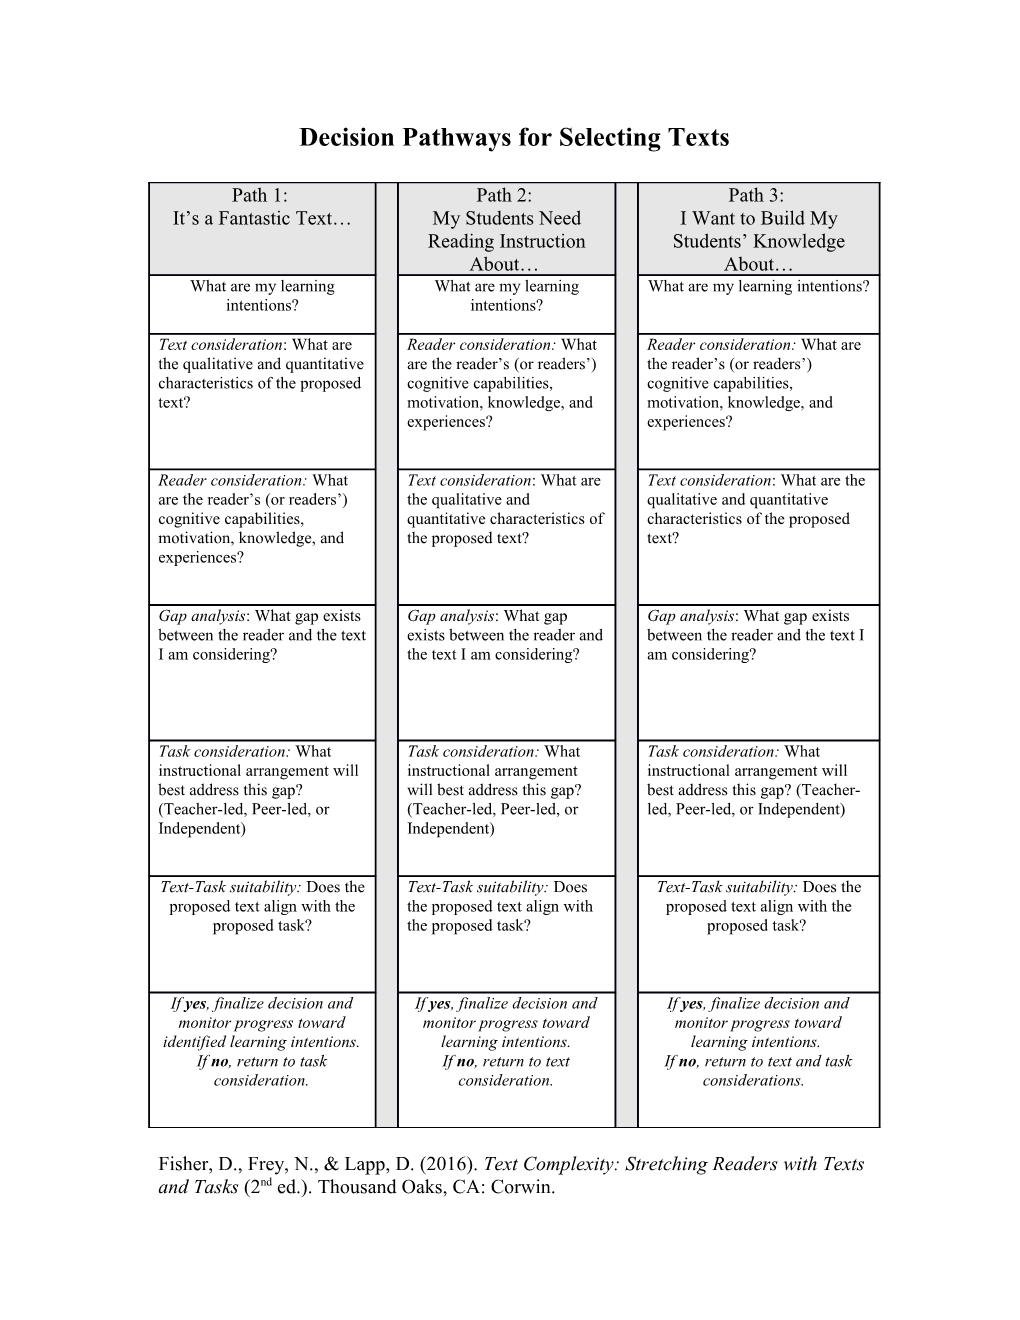 Decision Pathways for Selecting Texts